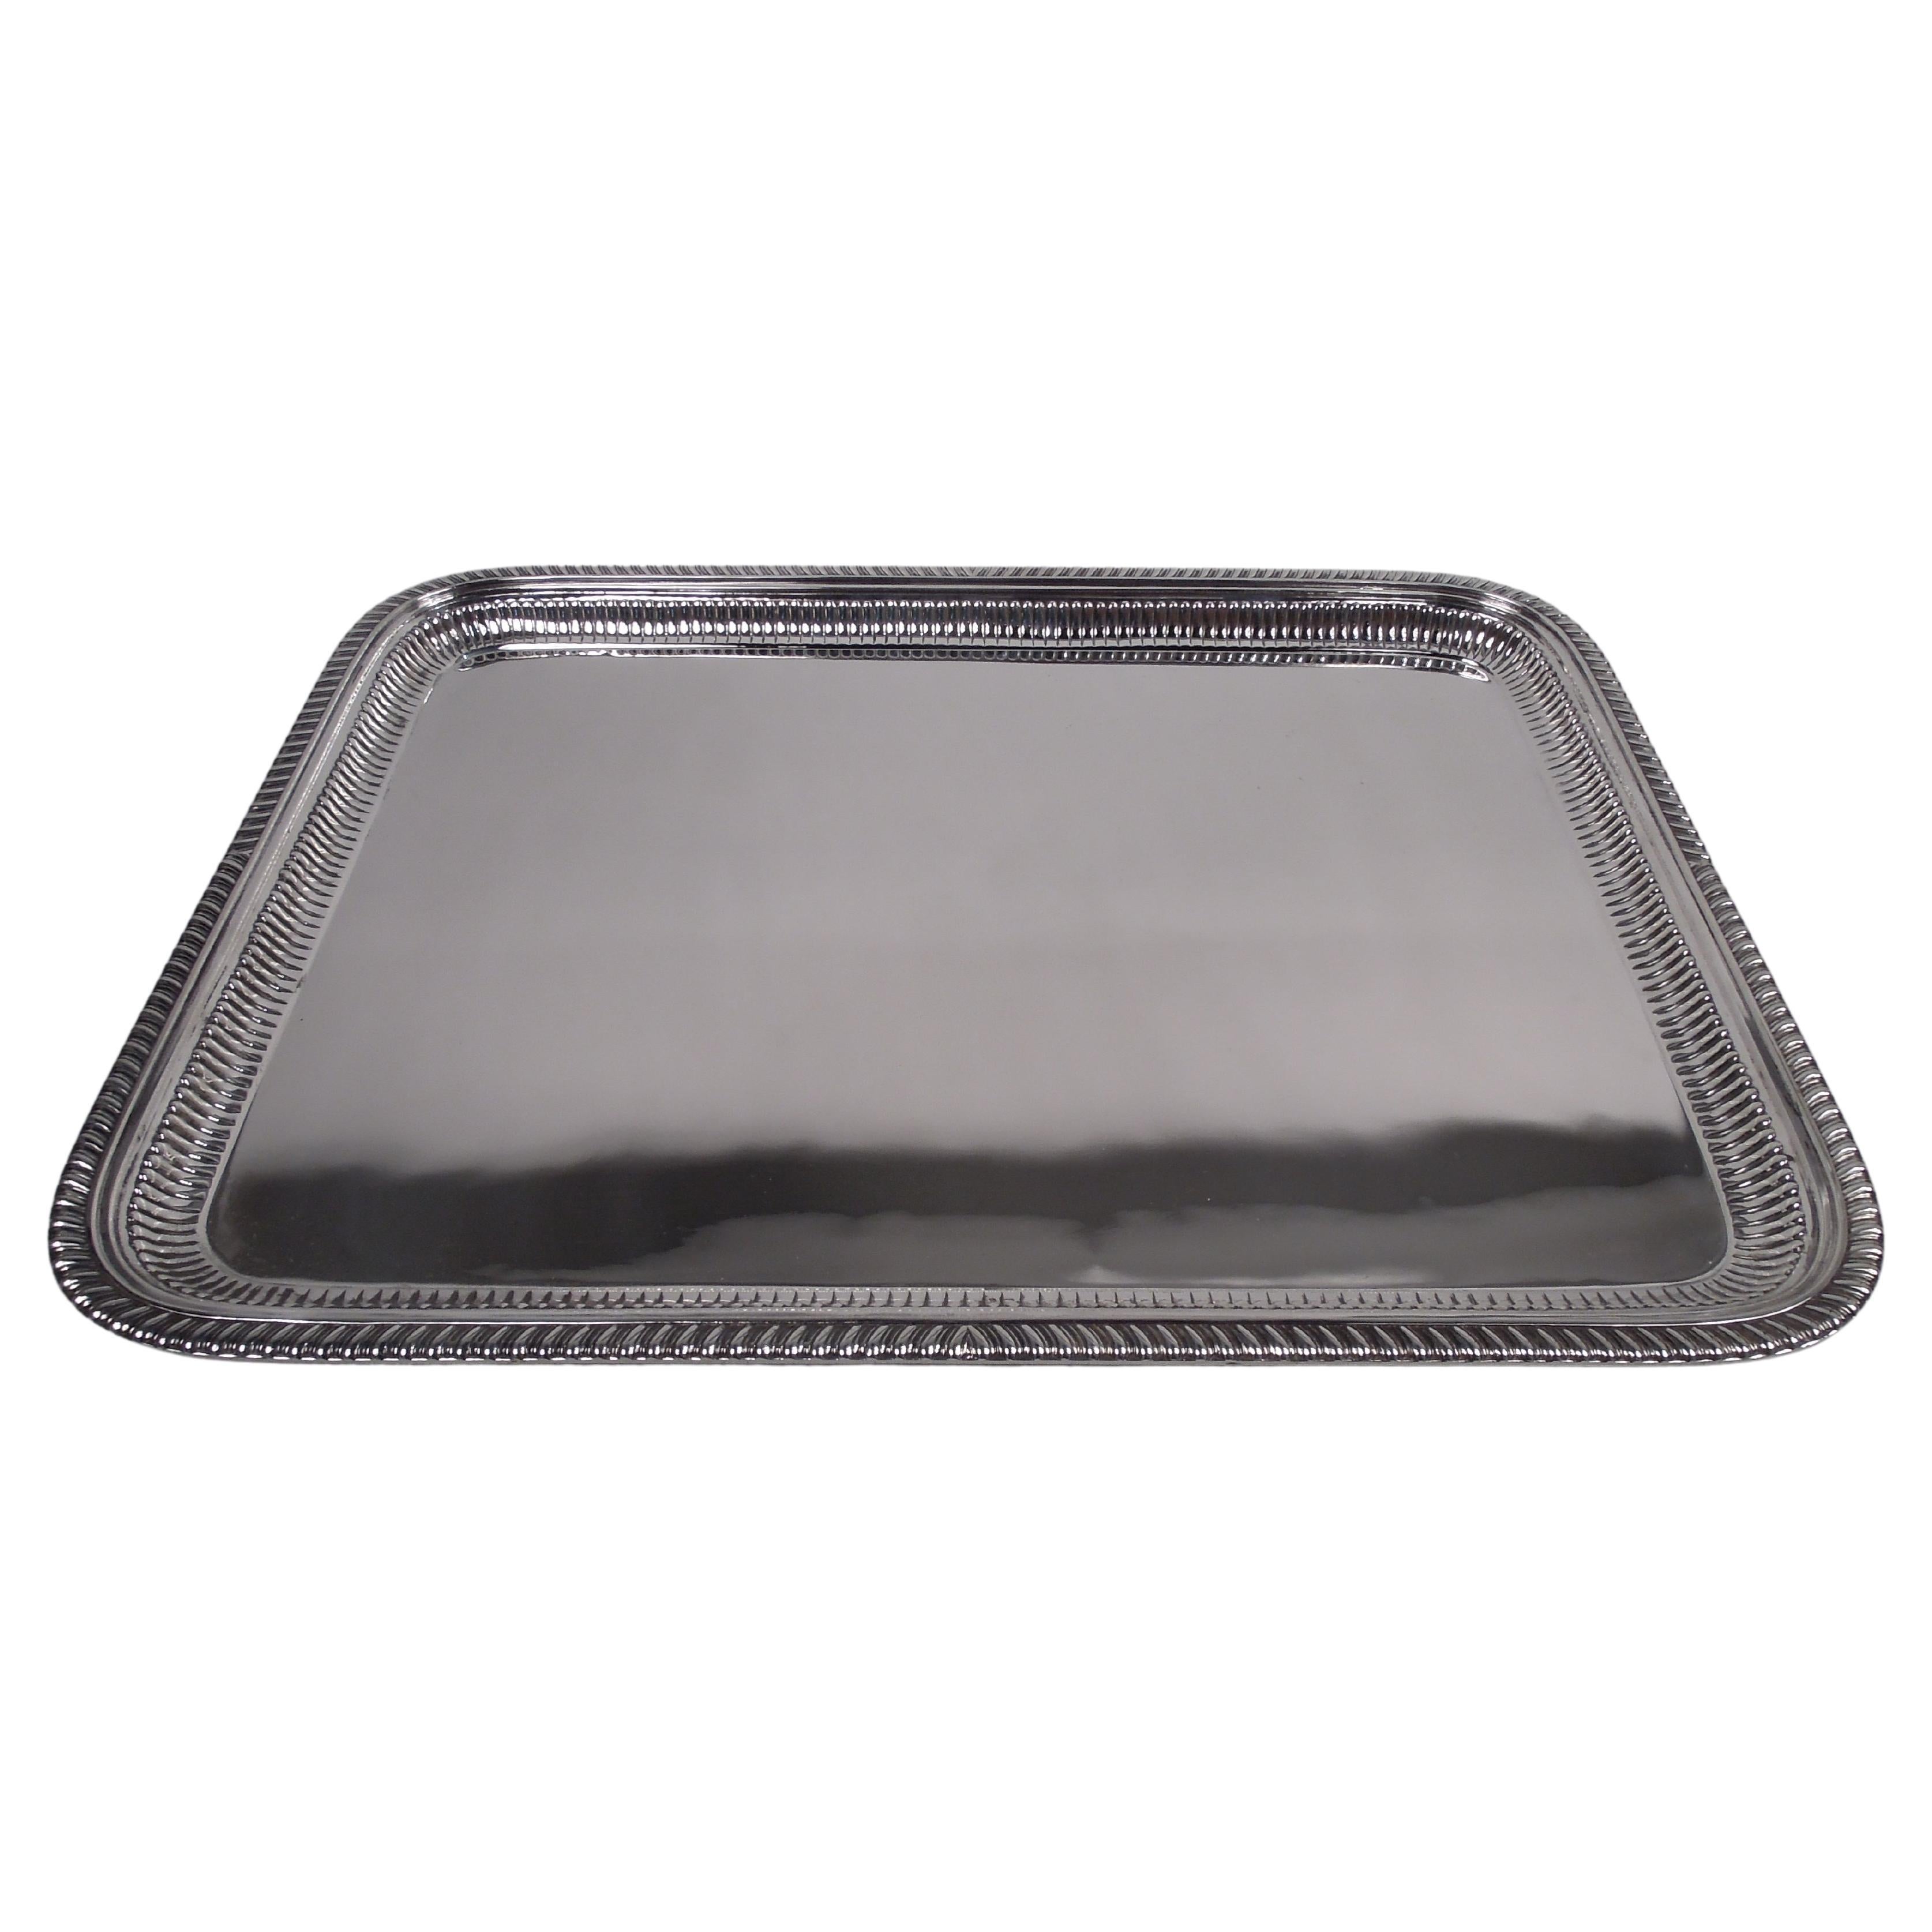 Large Dominick & Haff Victorian Classical Sterling Silver Tray, 1890